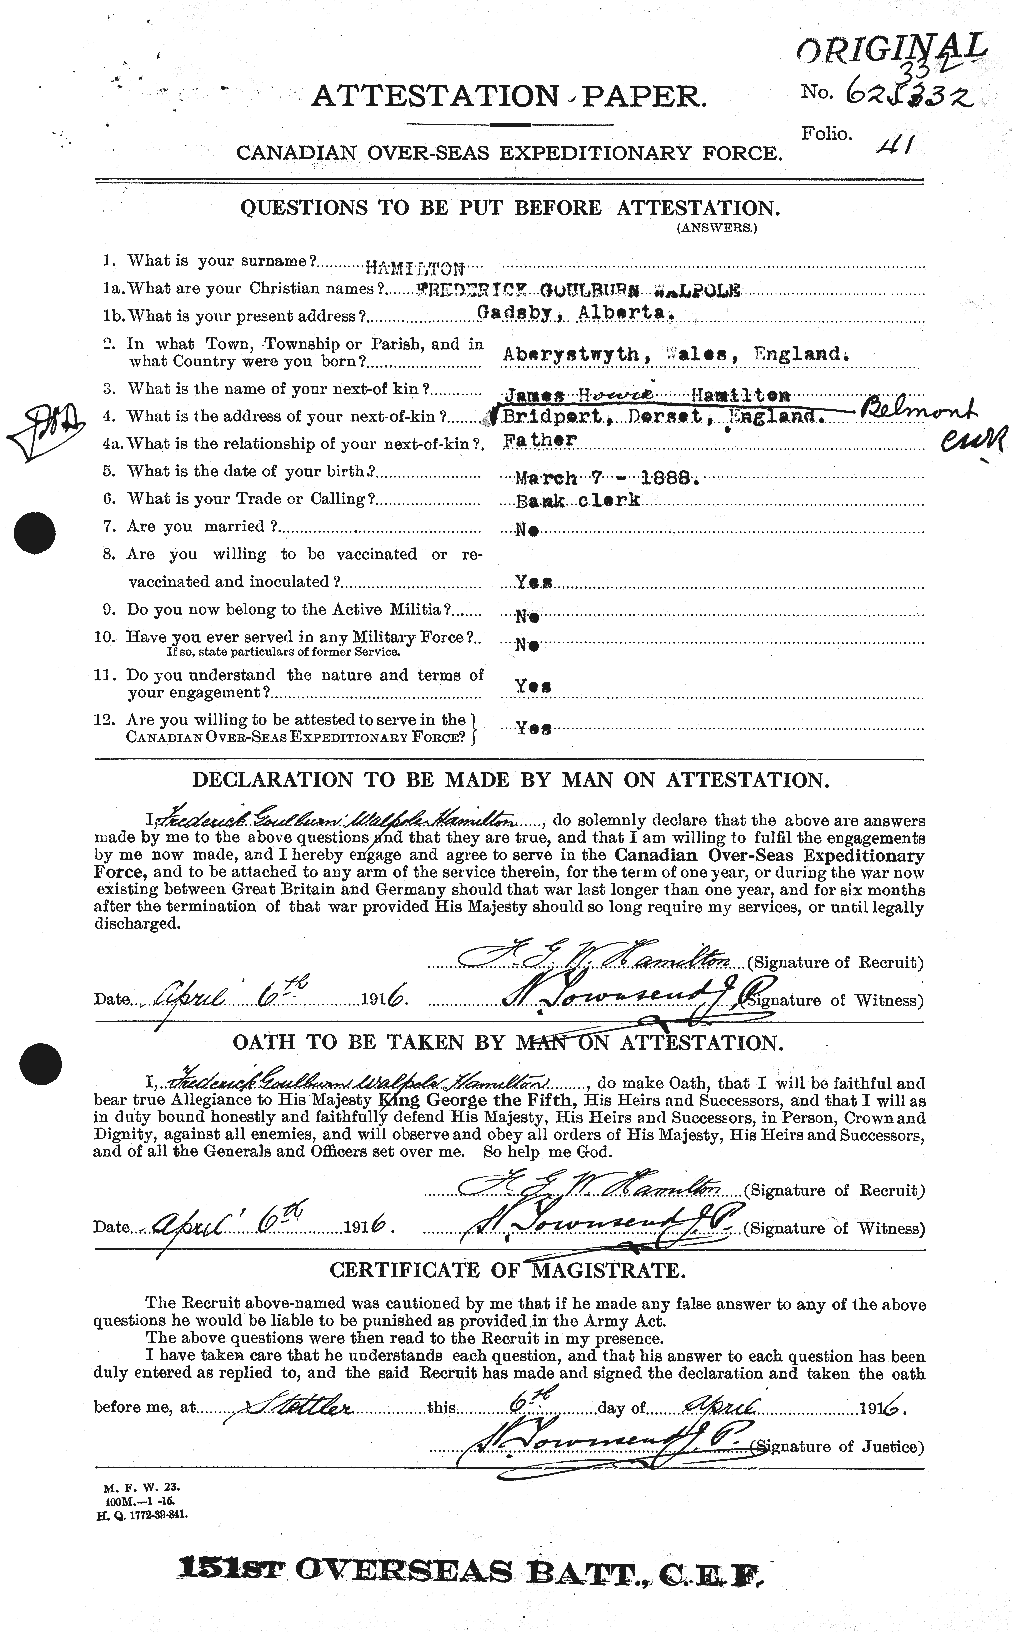 Personnel Records of the First World War - CEF 372407a